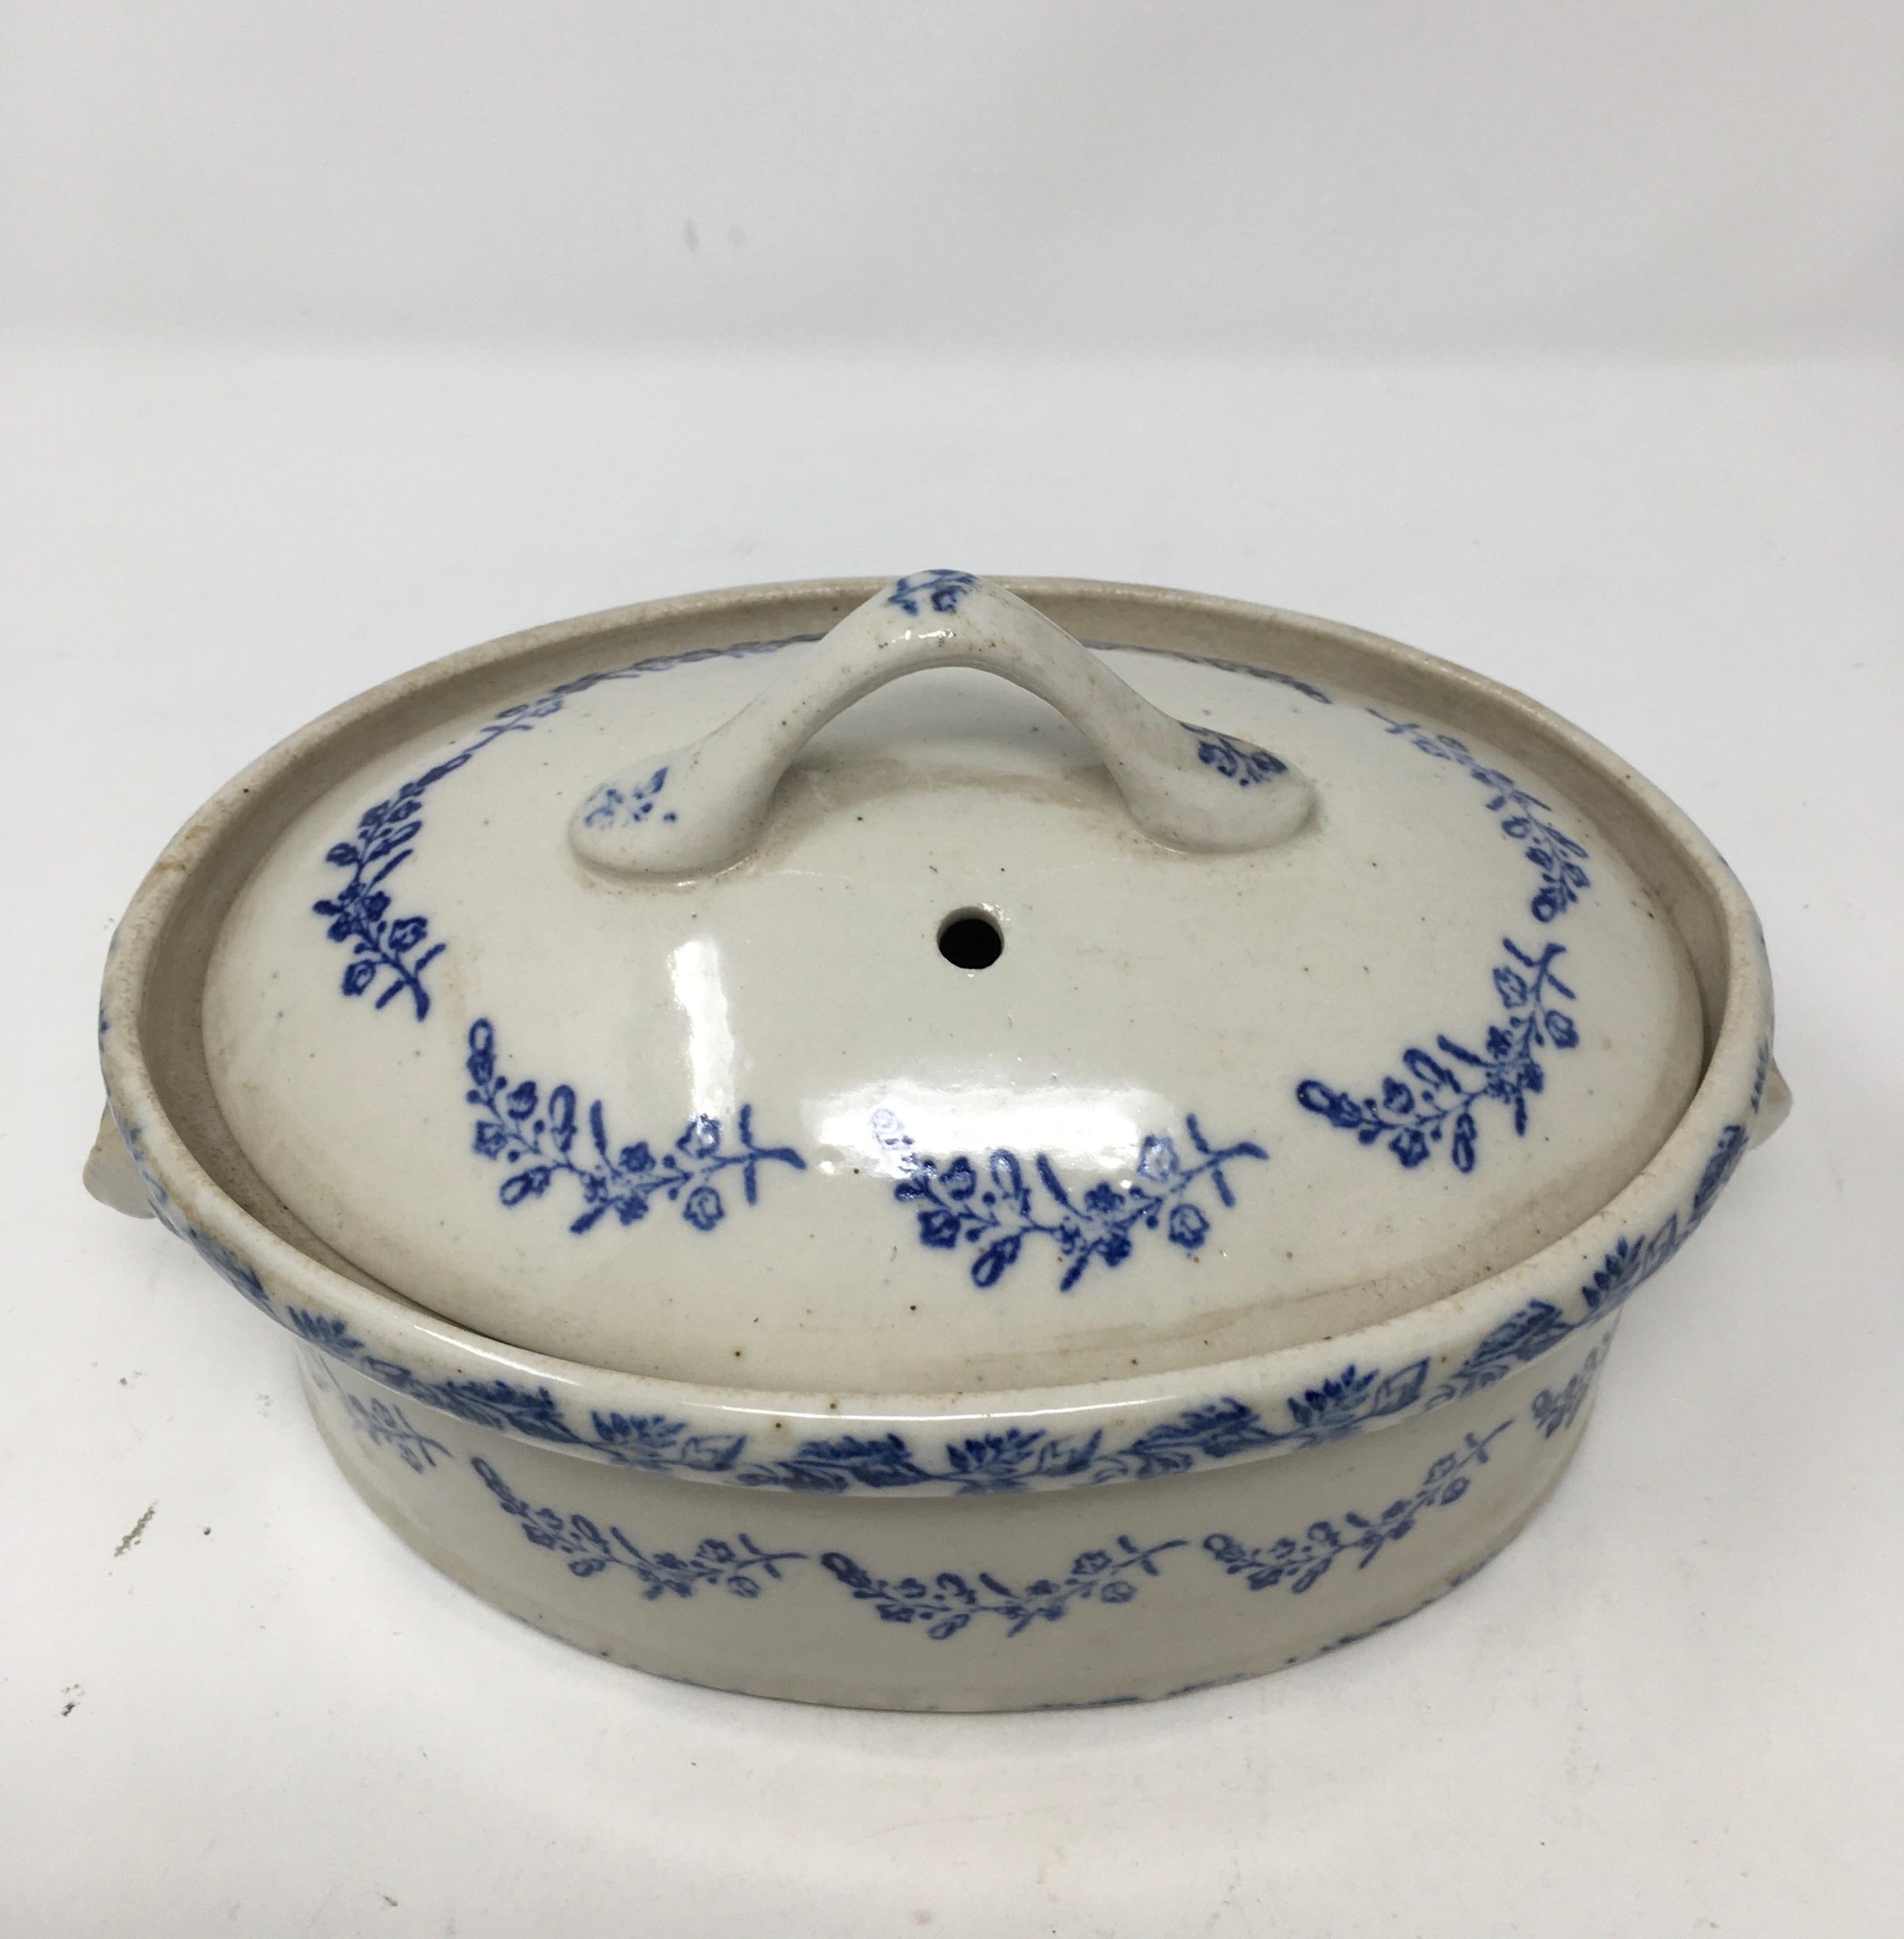 Found in France, this antique ironstone covered casserole dish has lovely blue floral transferred design. The piece is complete with a pull handle on the lid and two handles on the casserole itself. Stamped Marque Deposte on the bottom, this